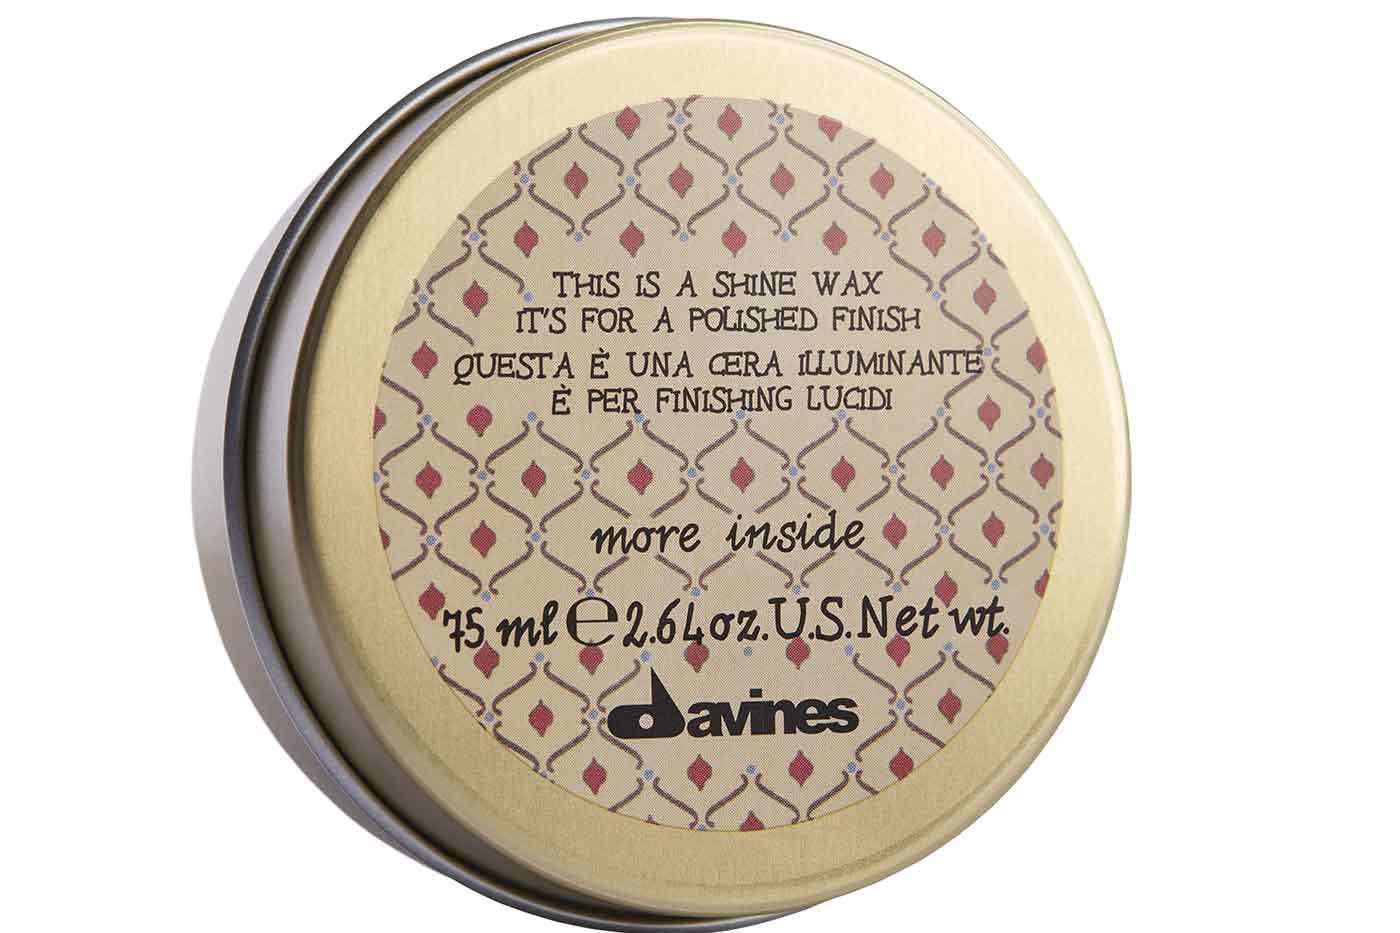 ‘This is a Shine Wax’ from Davines that will make your client’s hair shiny and sleek